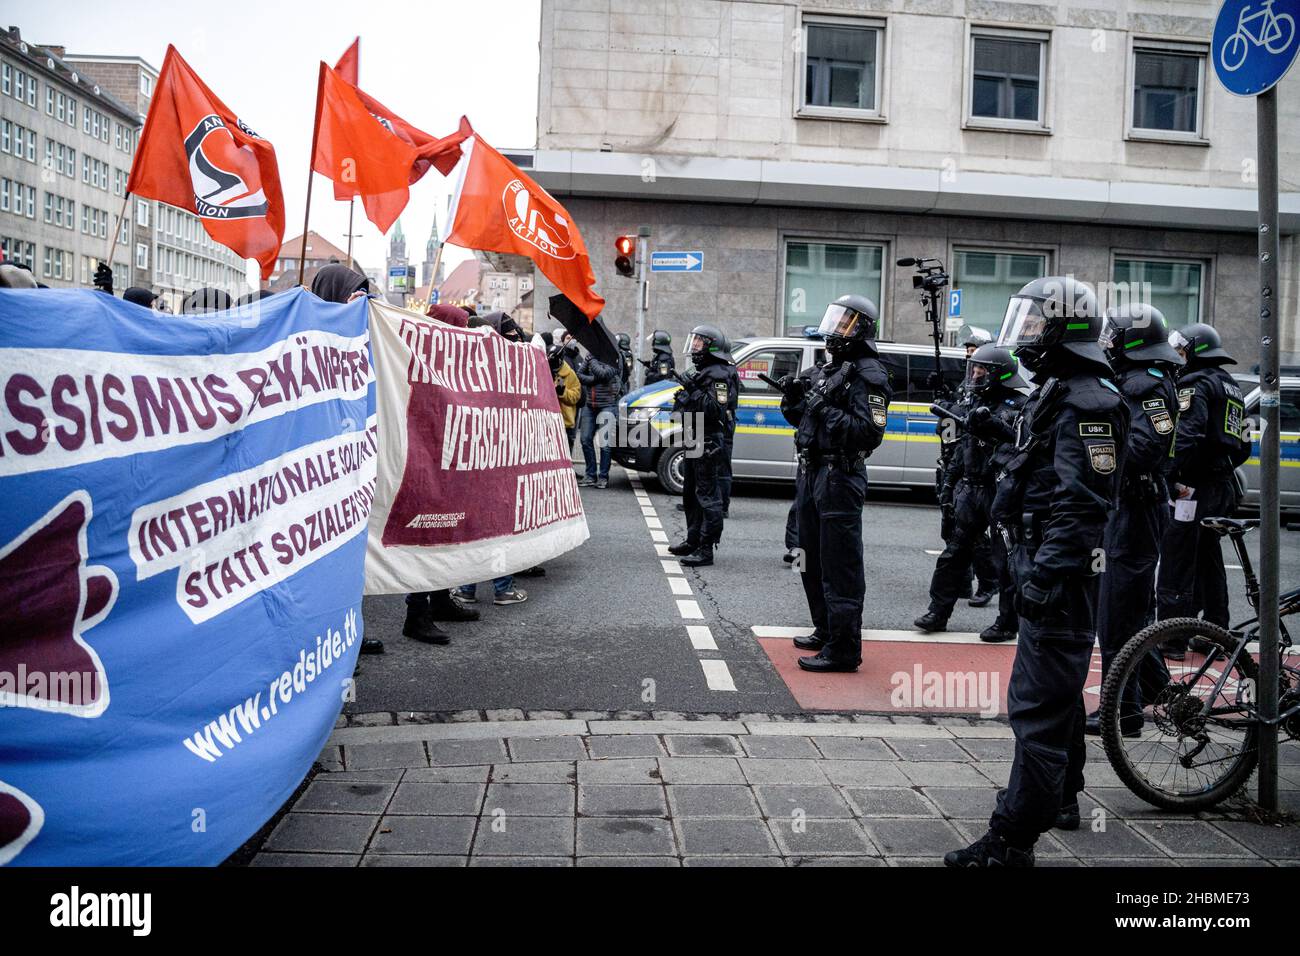 Nuremberg, Germany. 19th Dec, 2021. Antifa protest stopped by police. On December 19, 2021 the Alternative for Germany (AfD) held a rally in Nuremberg, Germany. There was counter protest, where there were some tensions between police and counter protestors. (Photo by Alexander Pohl/Sipa USA) Credit: Sipa USA/Alamy Live News Stock Photo